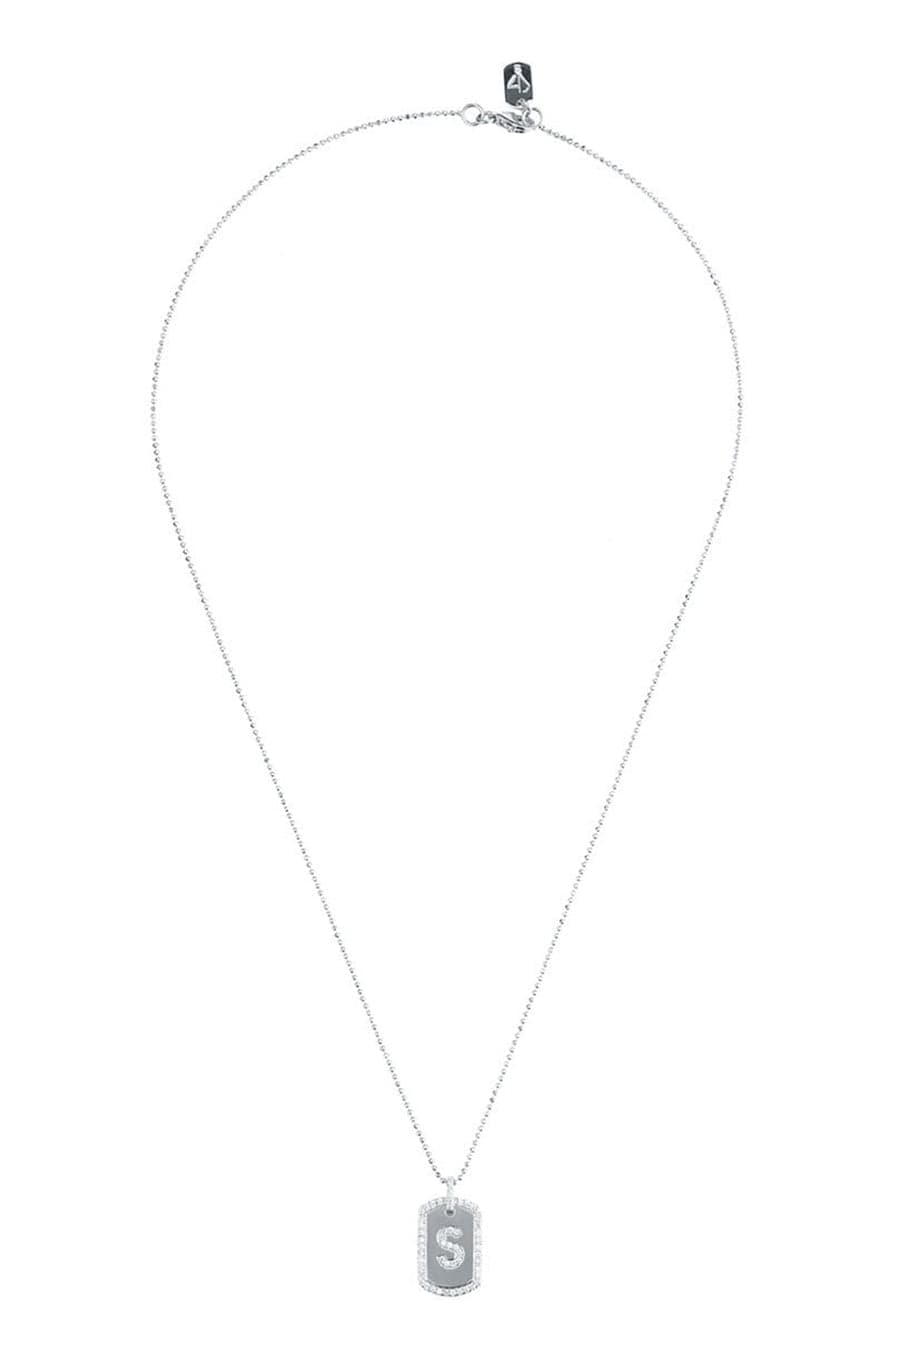 CARBON & HYDE-Initial Dogtag Necklace - White Gold-WHITE GOLD